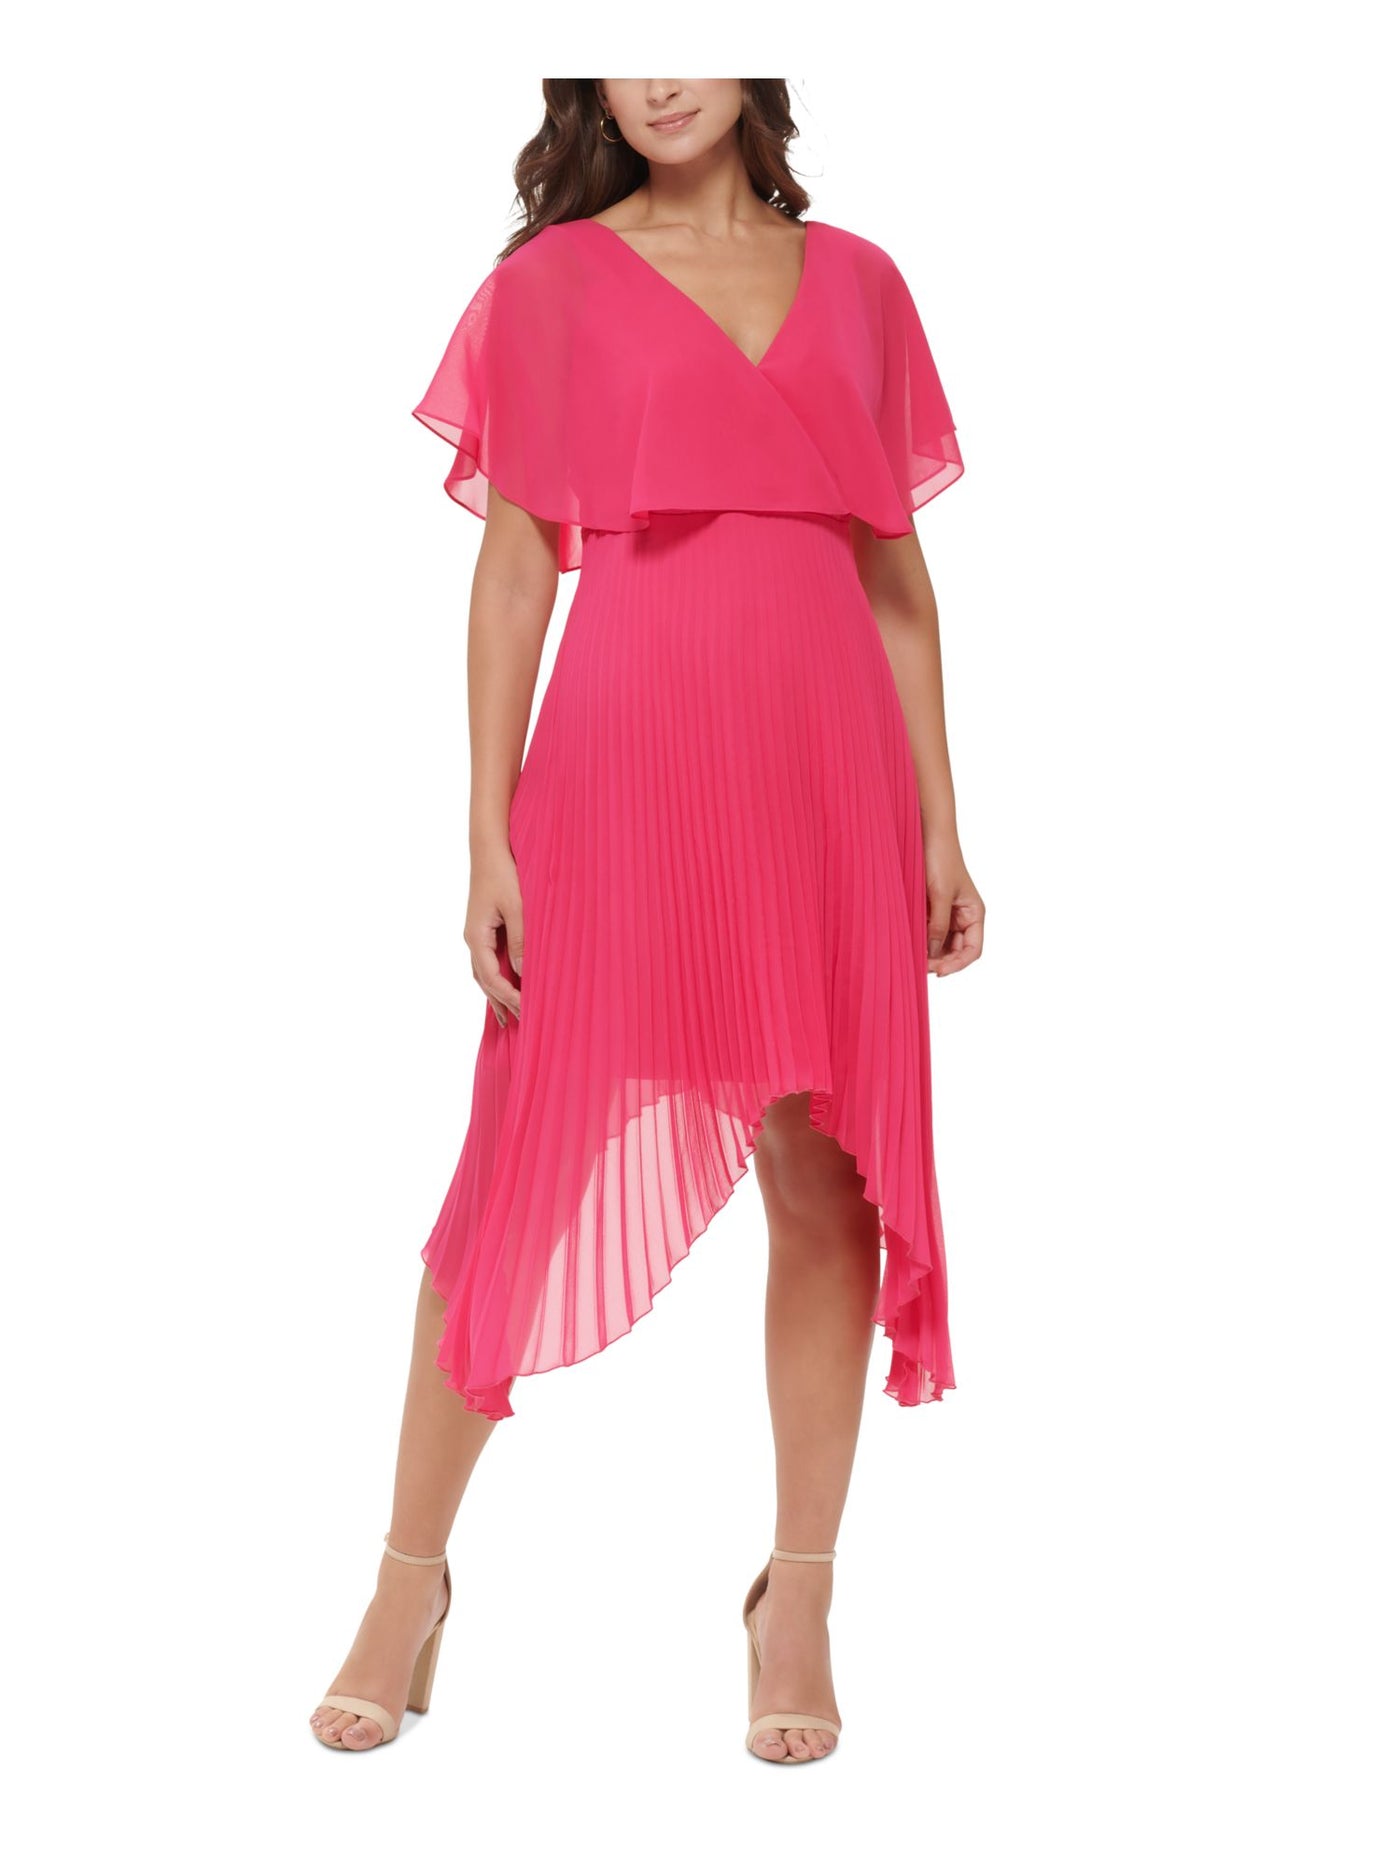 KENSIE DRESSES Womens Pink Pleated Zippered Lined Handkerchief Hem Sheer Flutter Sleeve V Neck Midi Party Fit + Flare Dress 14